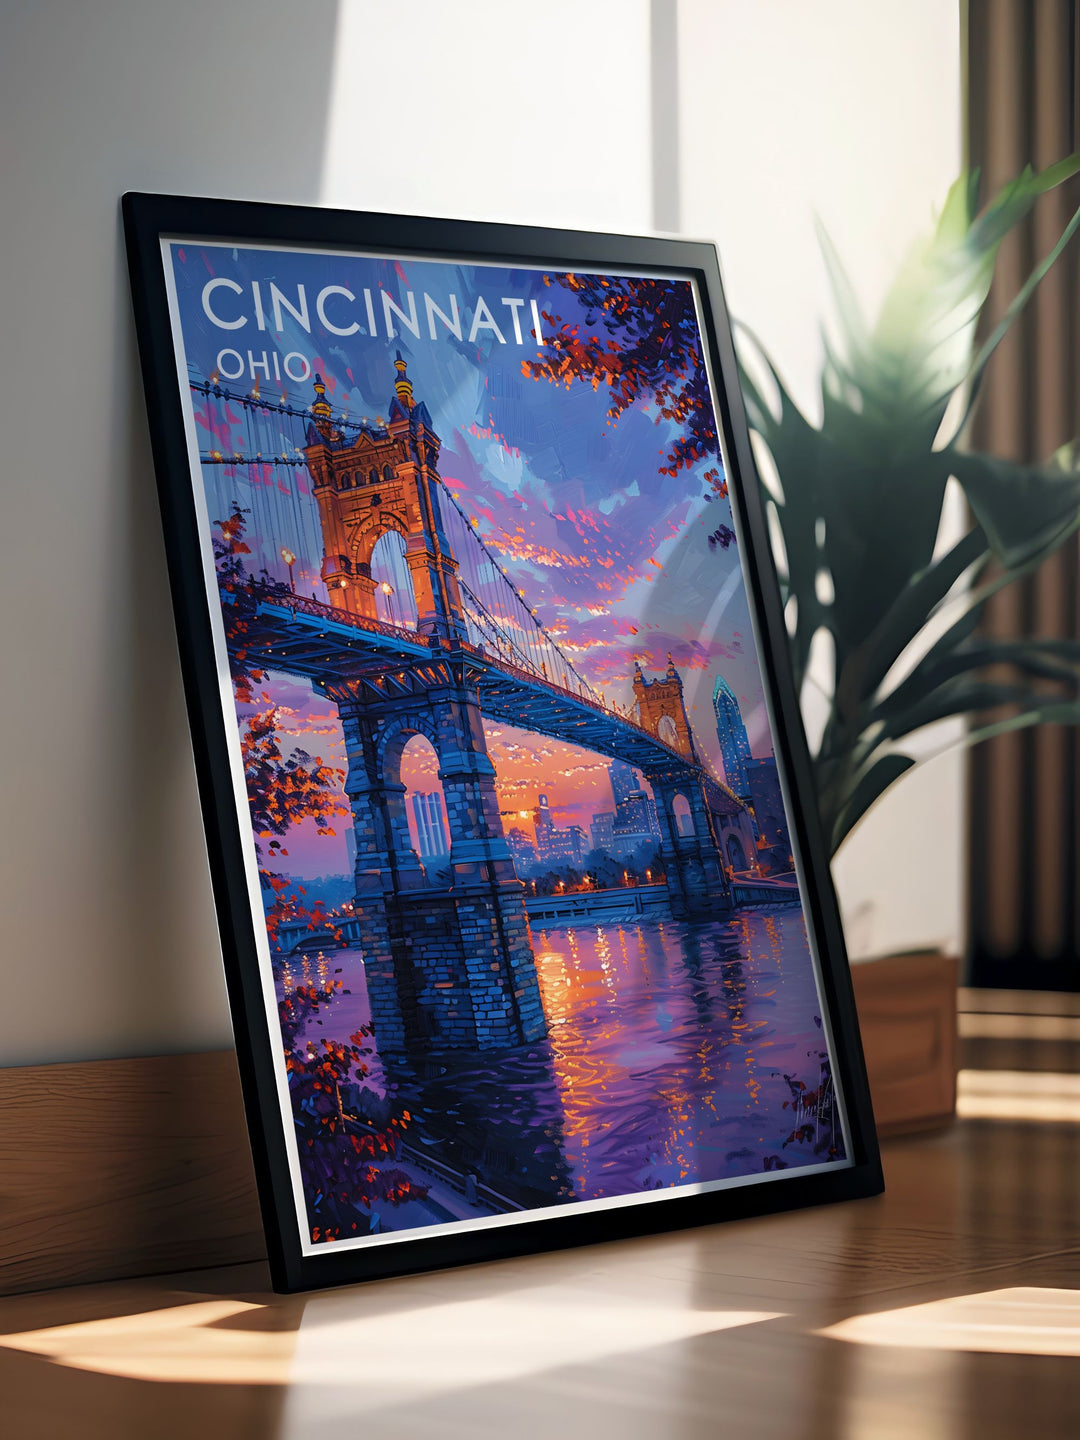 Experience the beauty of Cincinnati with a stunning print of the Roebling Suspension Bridge. This artwork showcases the bridges majestic towers and sweeping cables, bringing a piece of the city into your home.